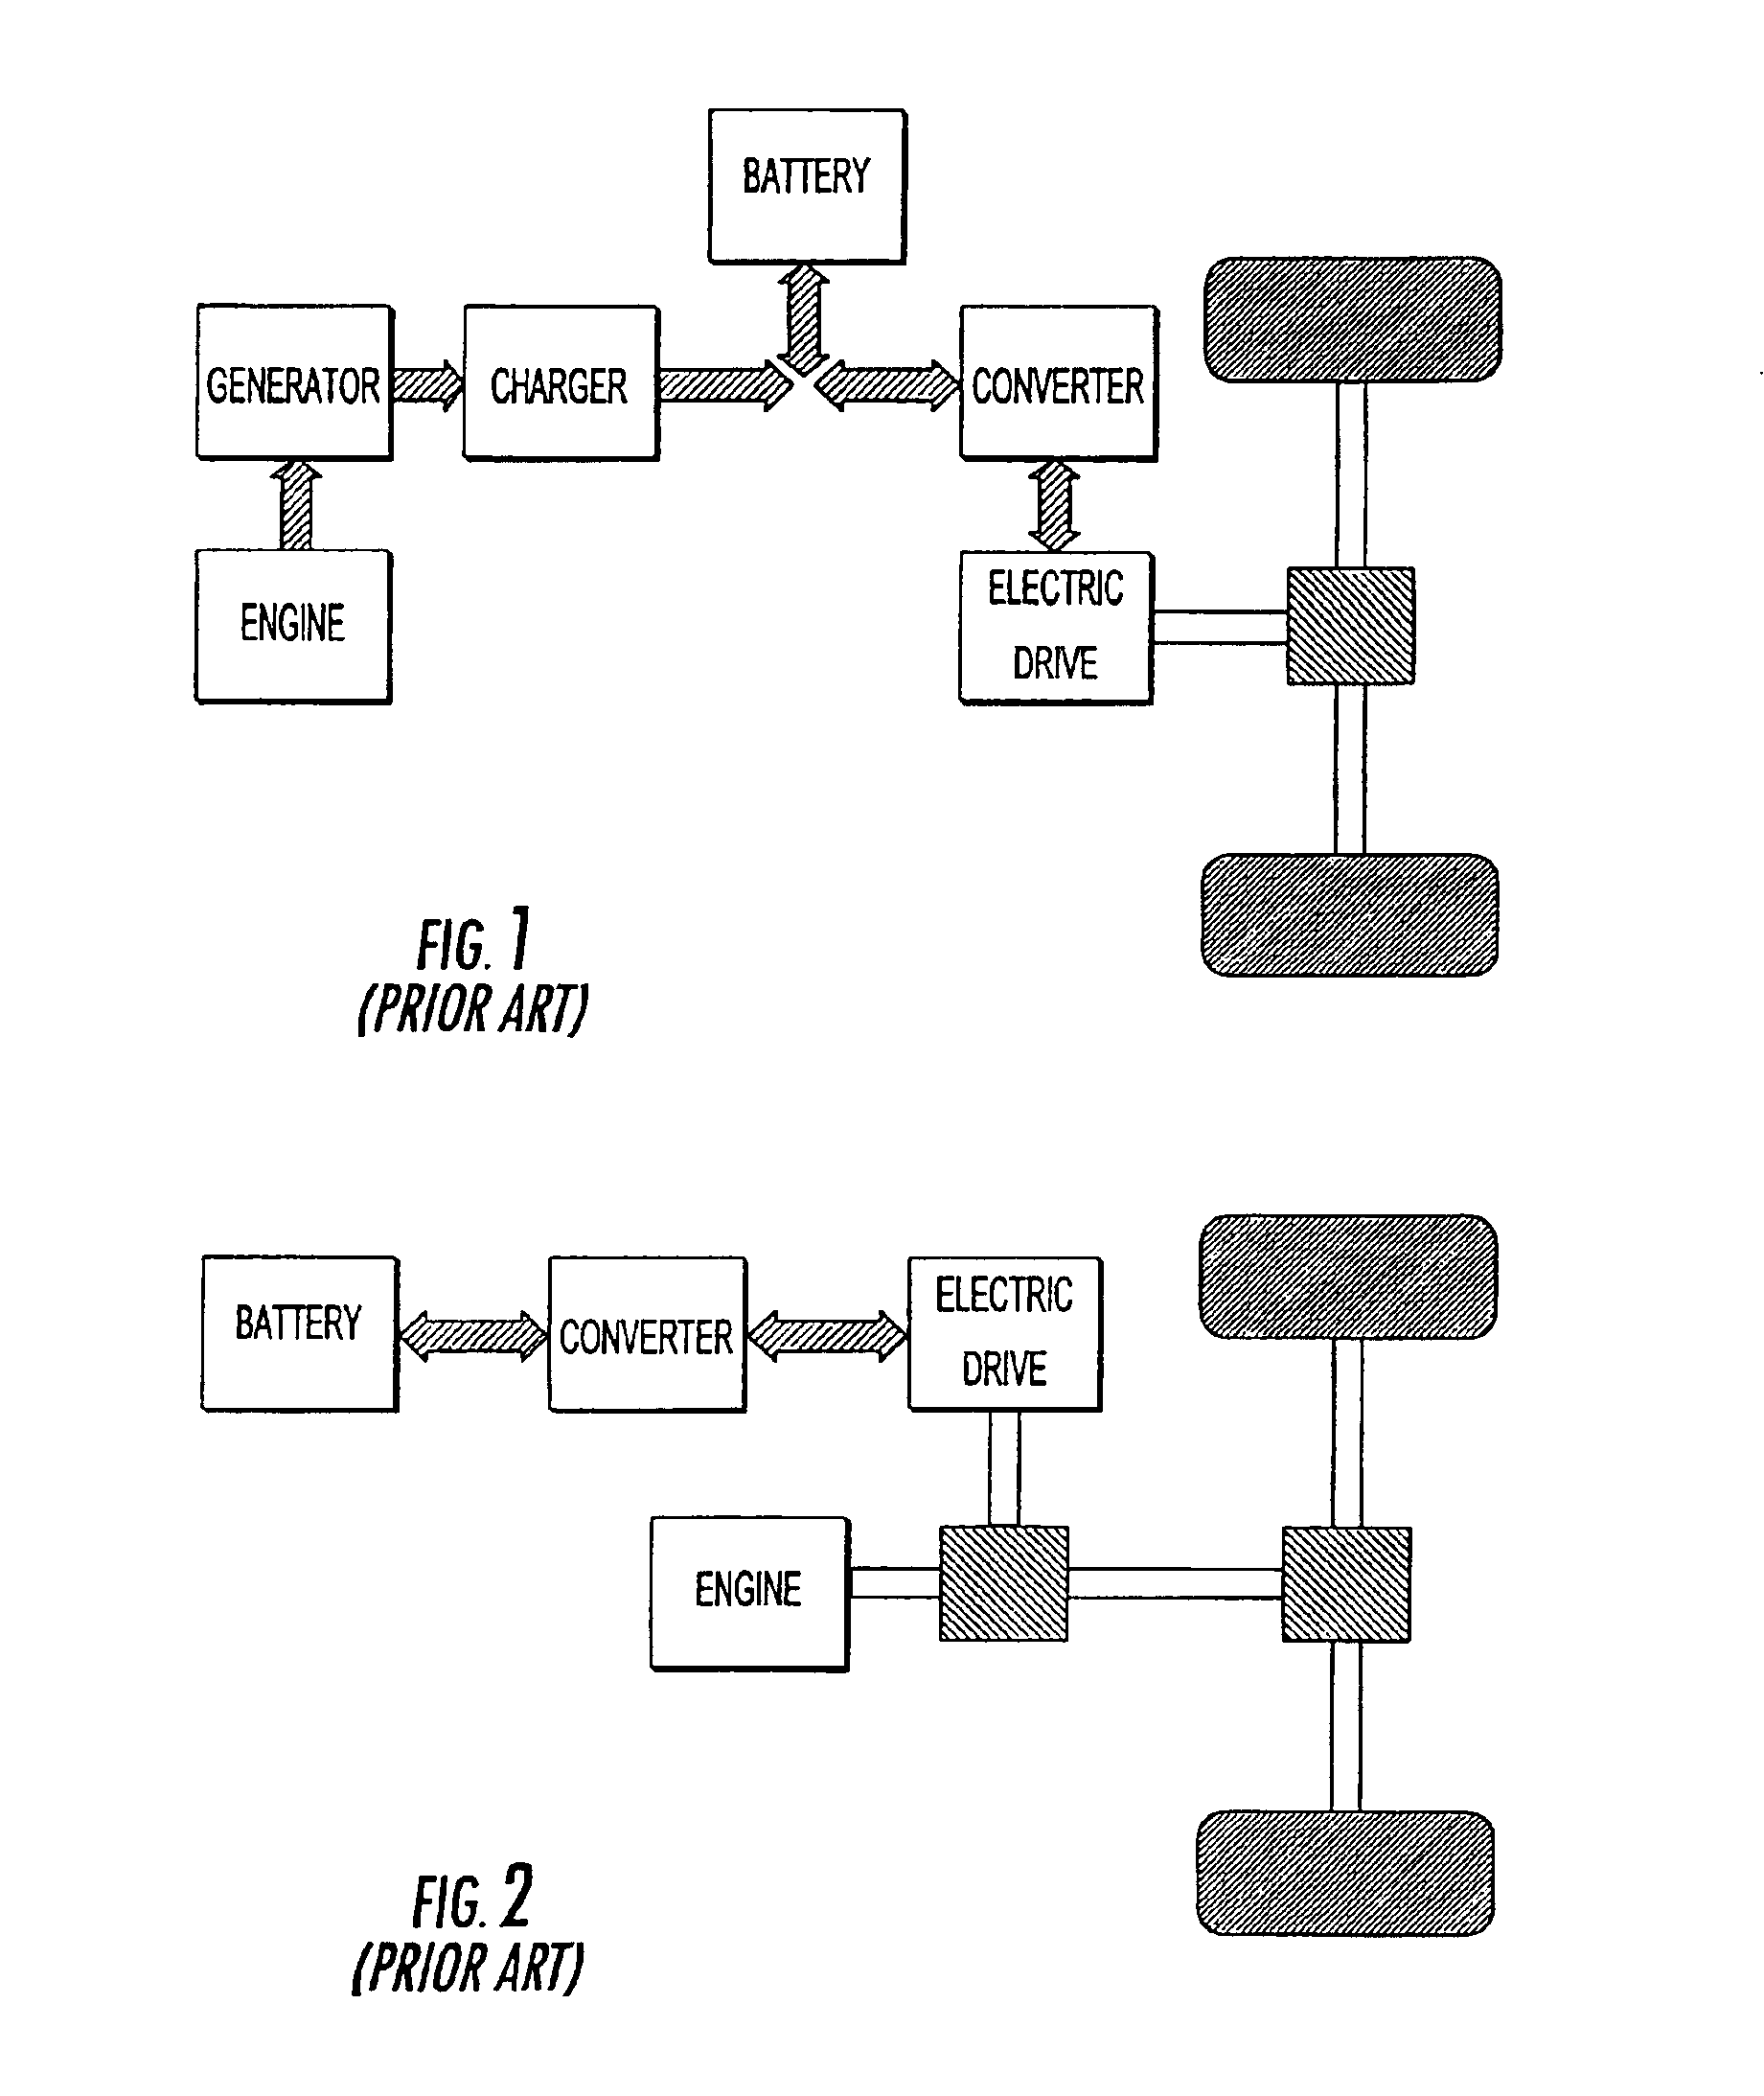 Electronic control system for torque distribution in hybrid vehicles